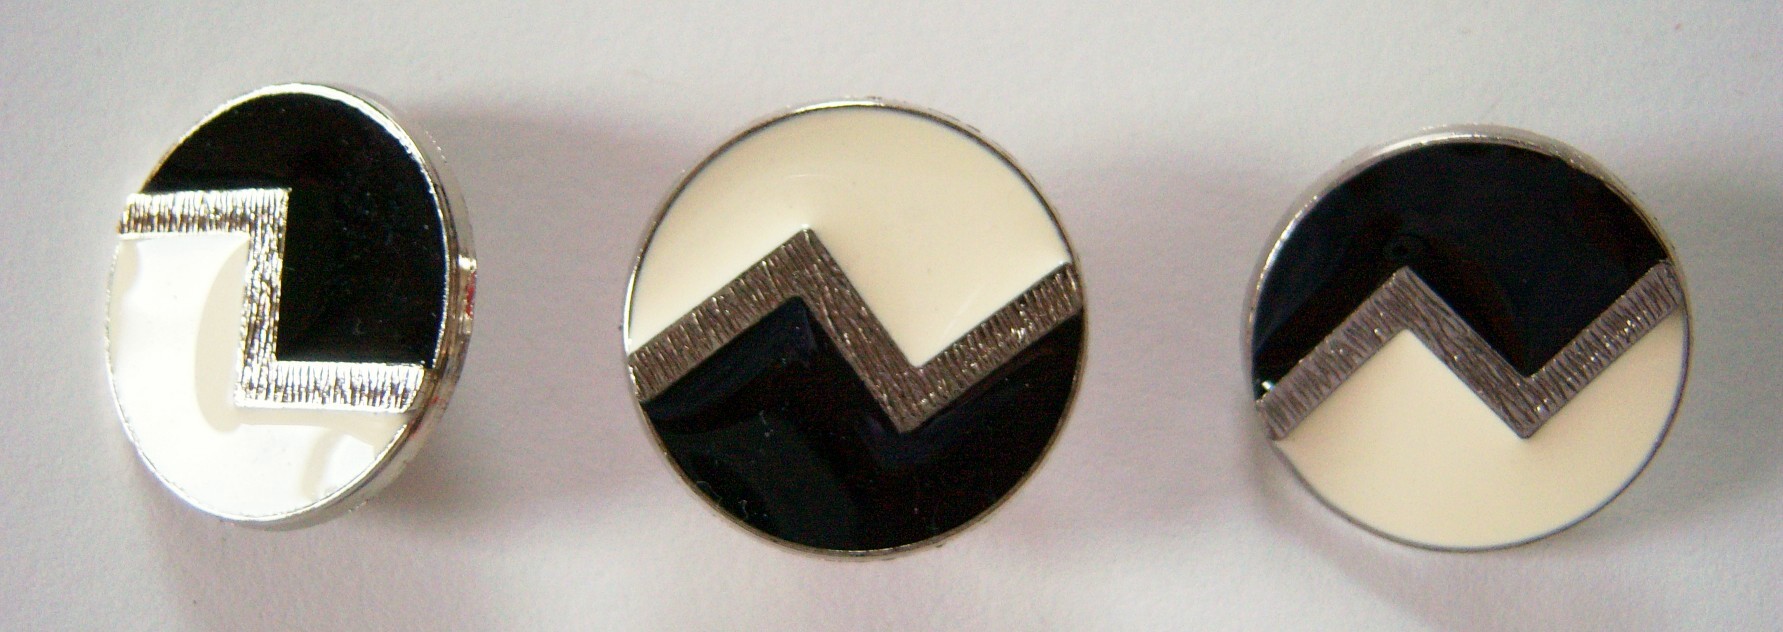 Black/Silver Crest 7/8" Shank Poly Button